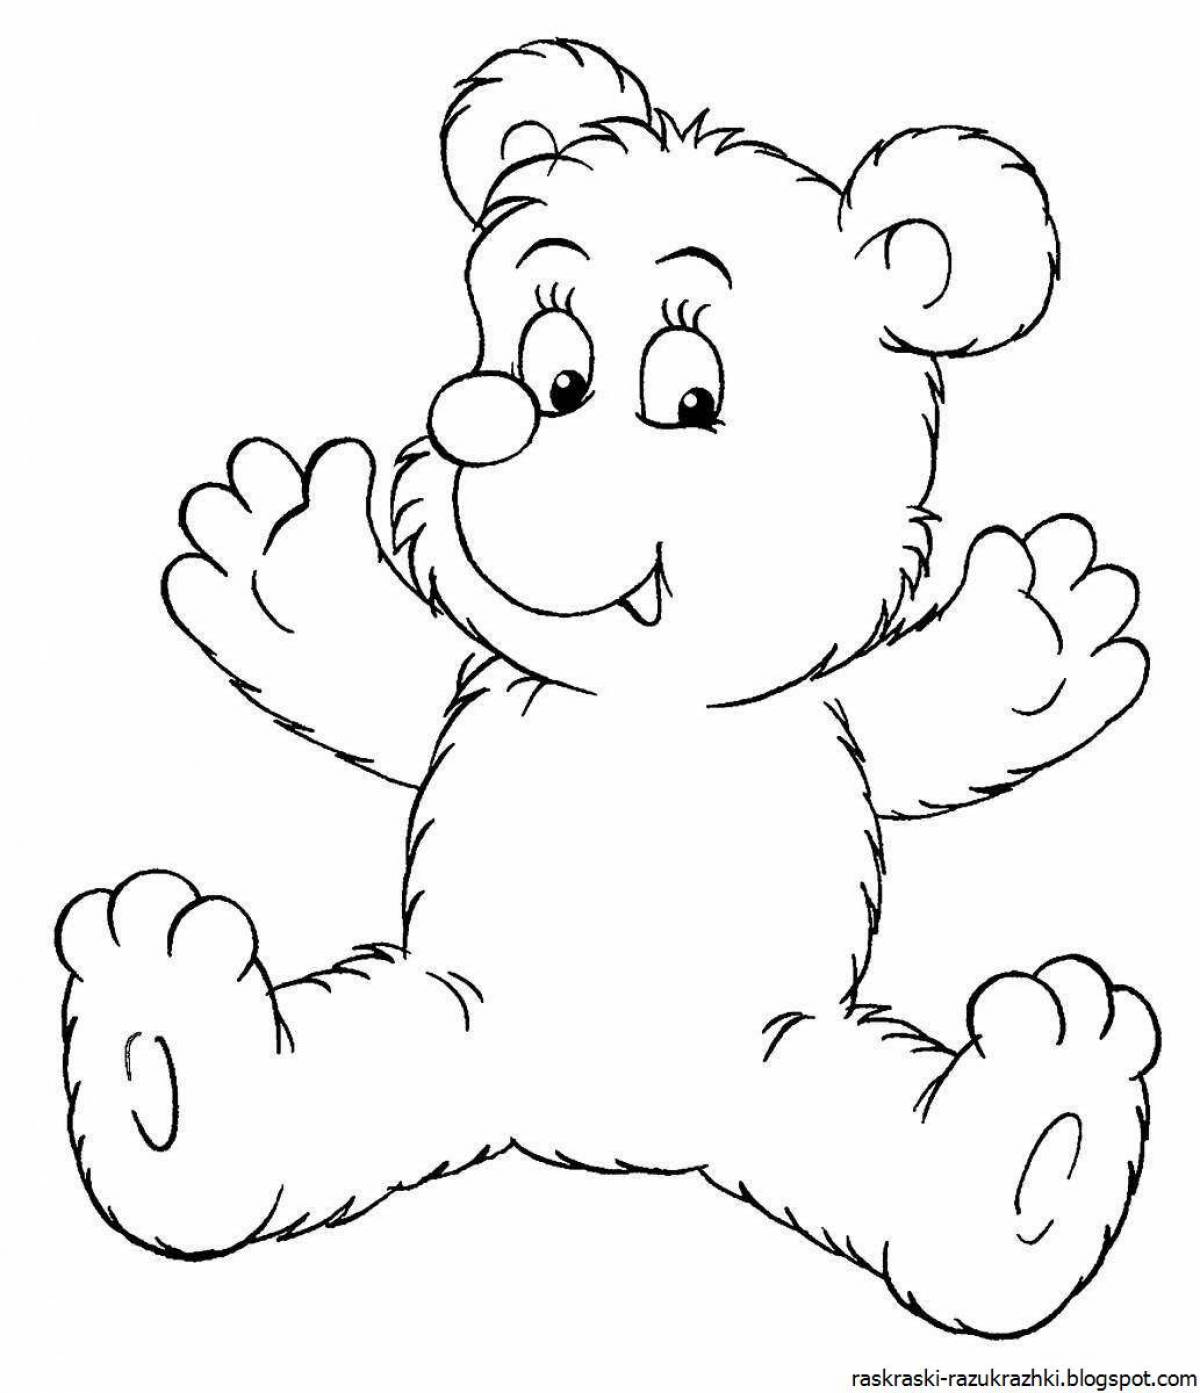 Adorable bear coloring book for kids